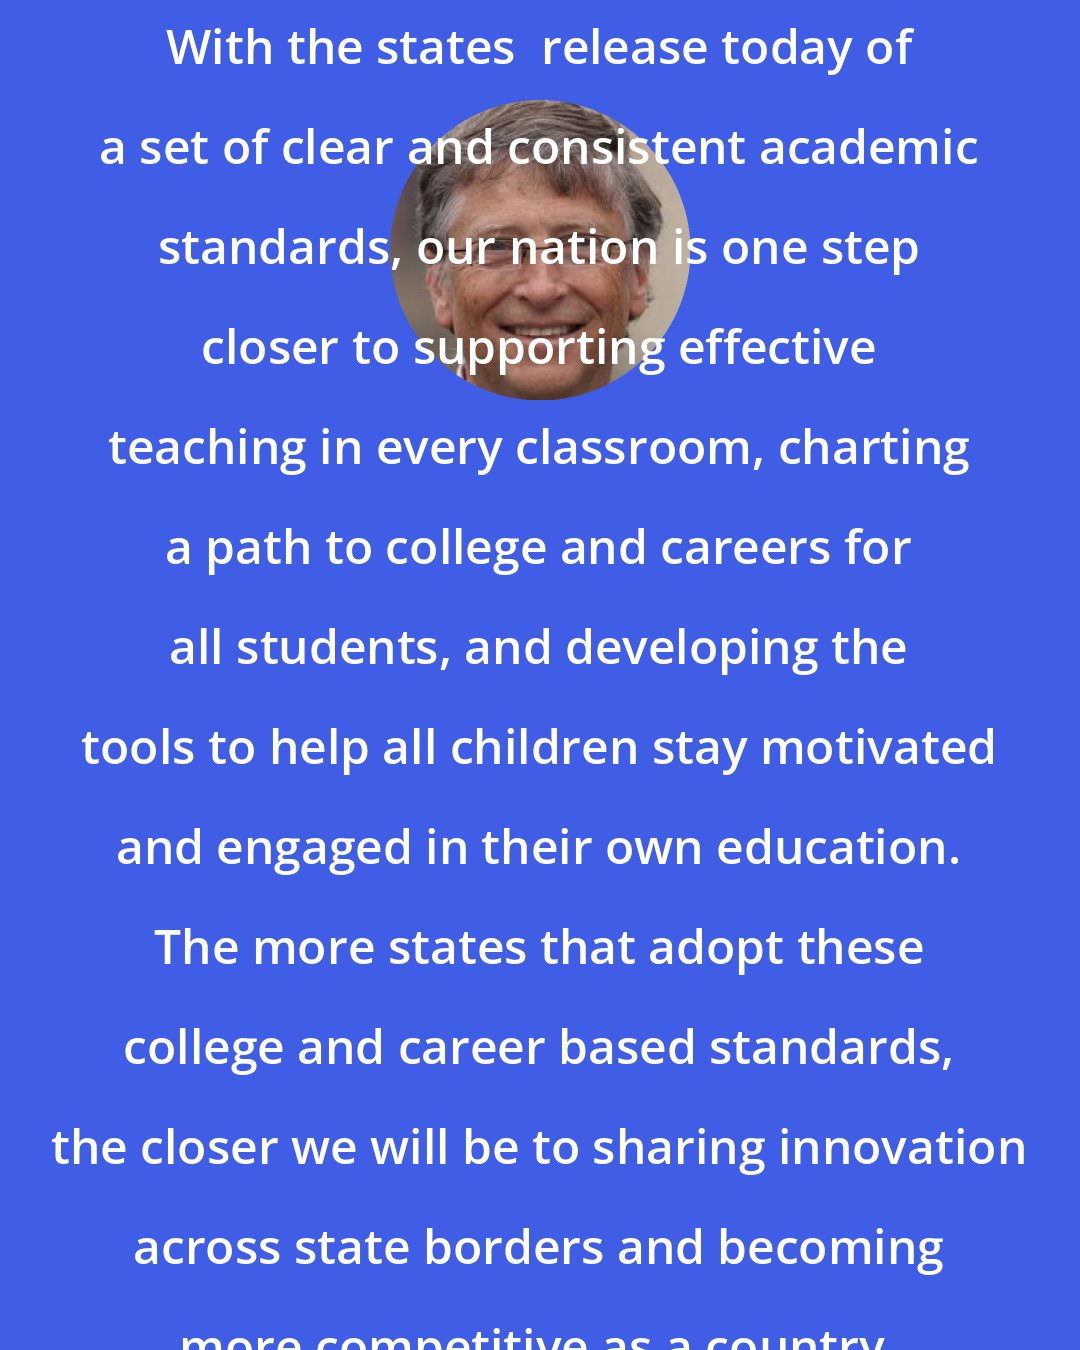 Bill Gates: With the states  release today of a set of clear and consistent academic standards, our nation is one step closer to supporting effective teaching in every classroom, charting a path to college and careers for all students, and developing the tools to help all children stay motivated and engaged in their own education. The more states that adopt these college and career based standards, the closer we will be to sharing innovation across state borders and becoming more competitive as a country.